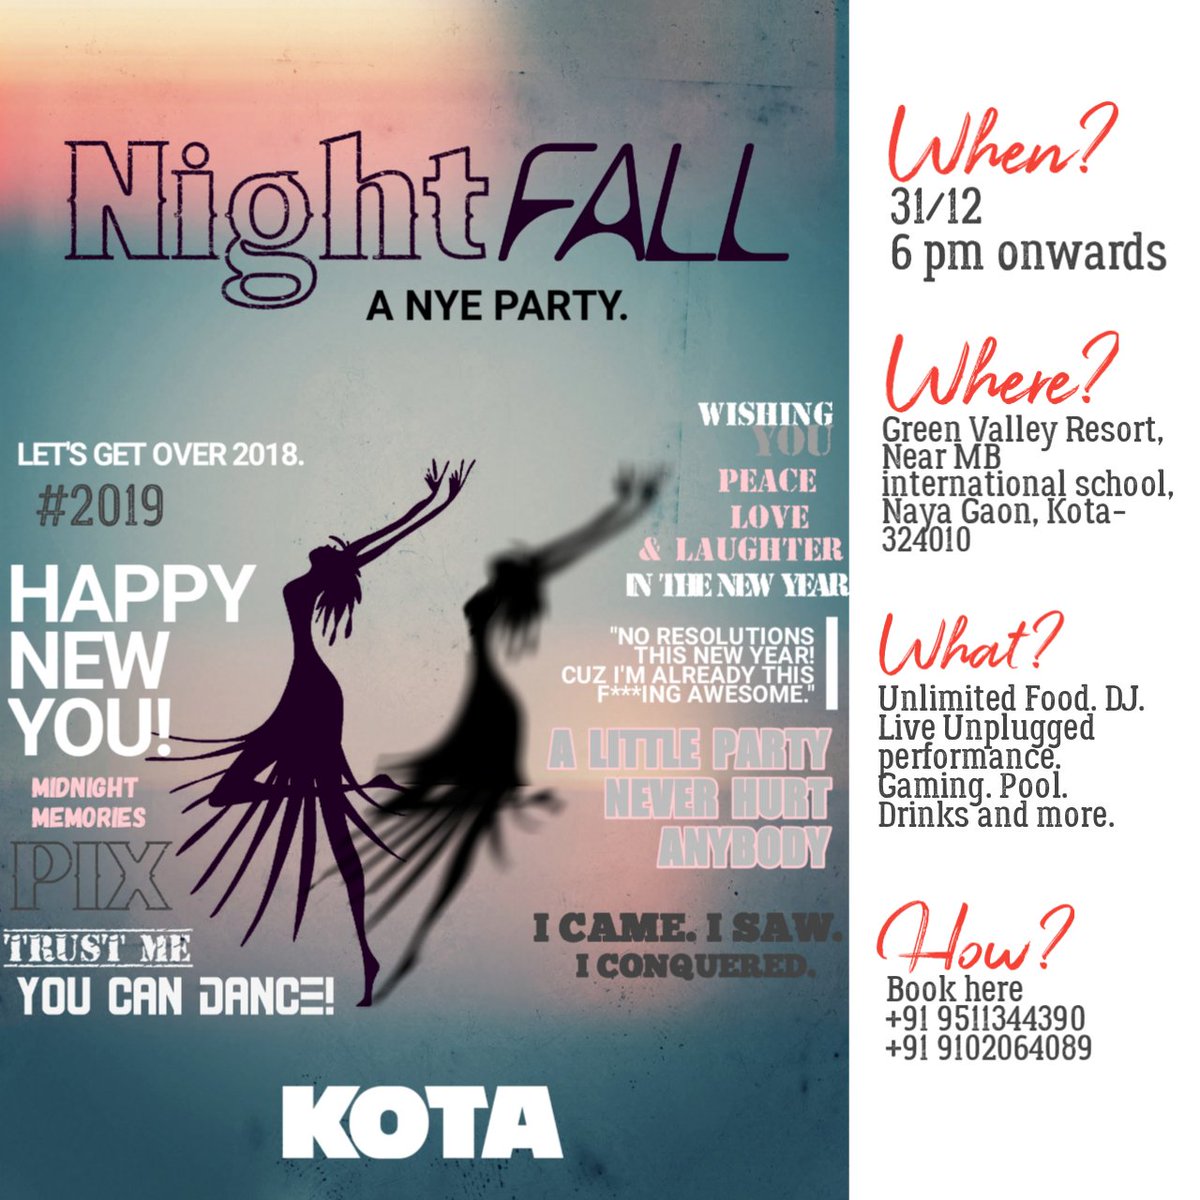 Only for those who wants to give this year a perfect start!!
#nightfall #nye_kota #awesome2019 #byebye2018